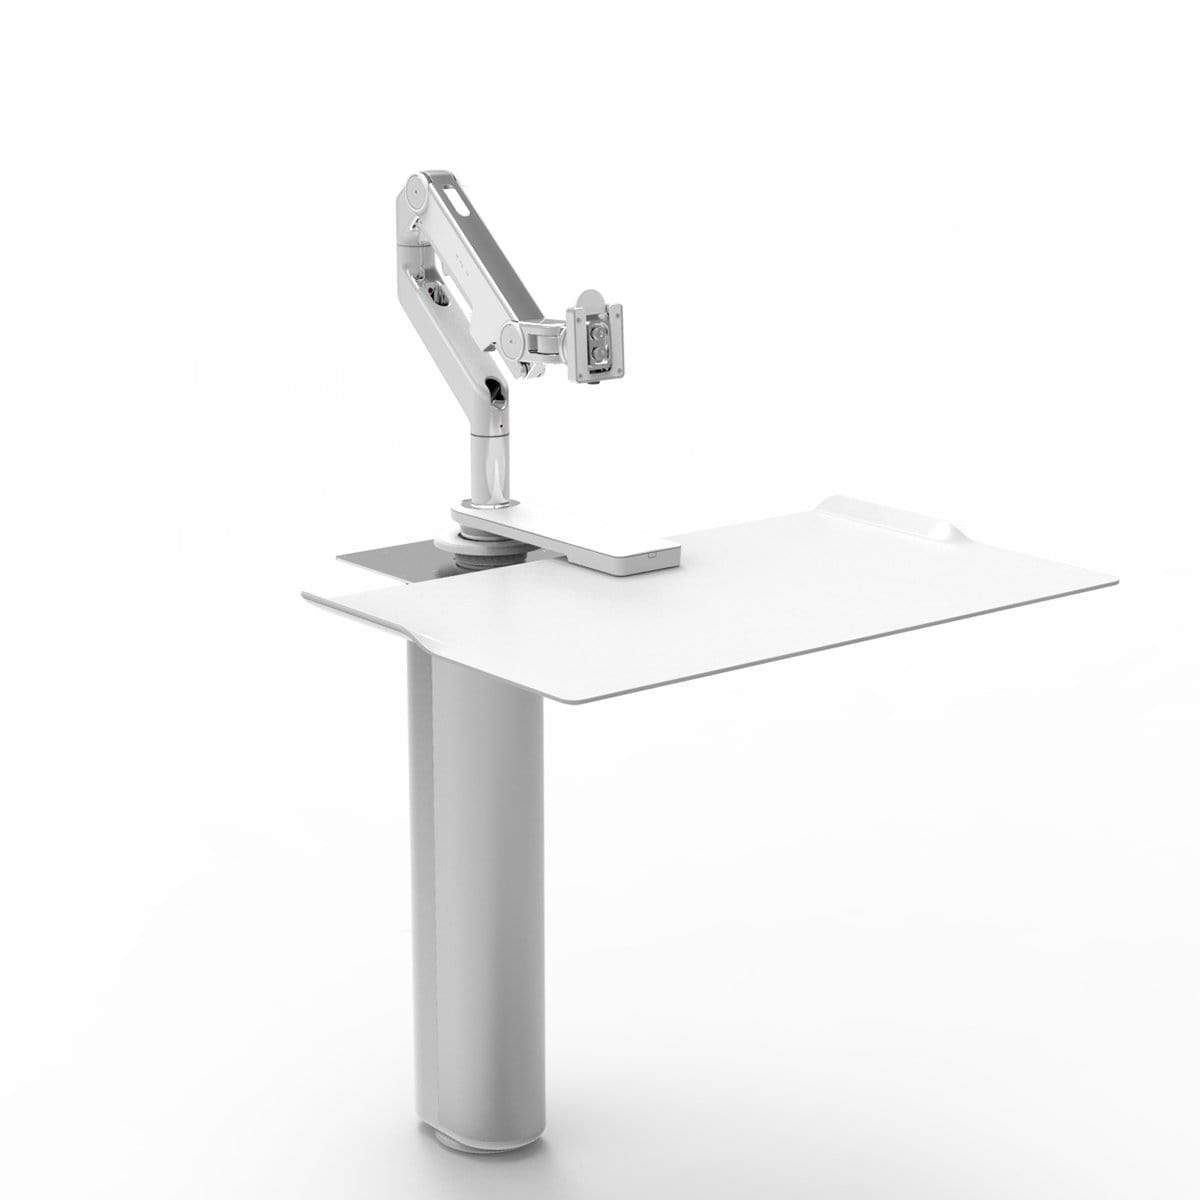 Humanscale Under Desk White / M8 Monitor Arm Mount (Arm Sold Separately) Humanscale QUICKSTAND UNDER DESK